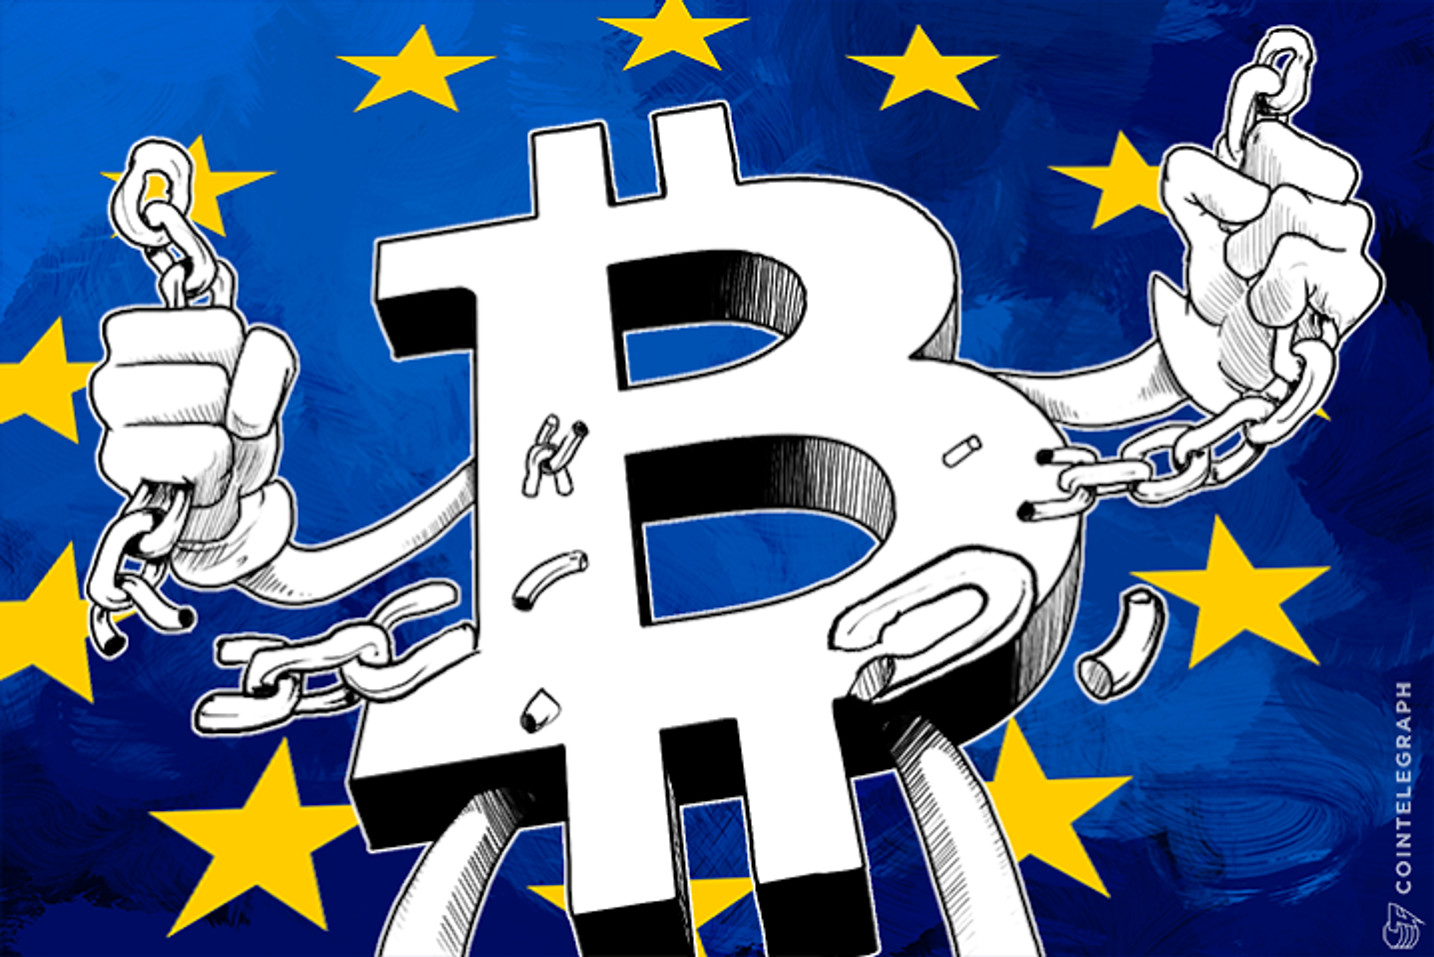 EU Regulators Warn Again About Crypto Investment Risks!